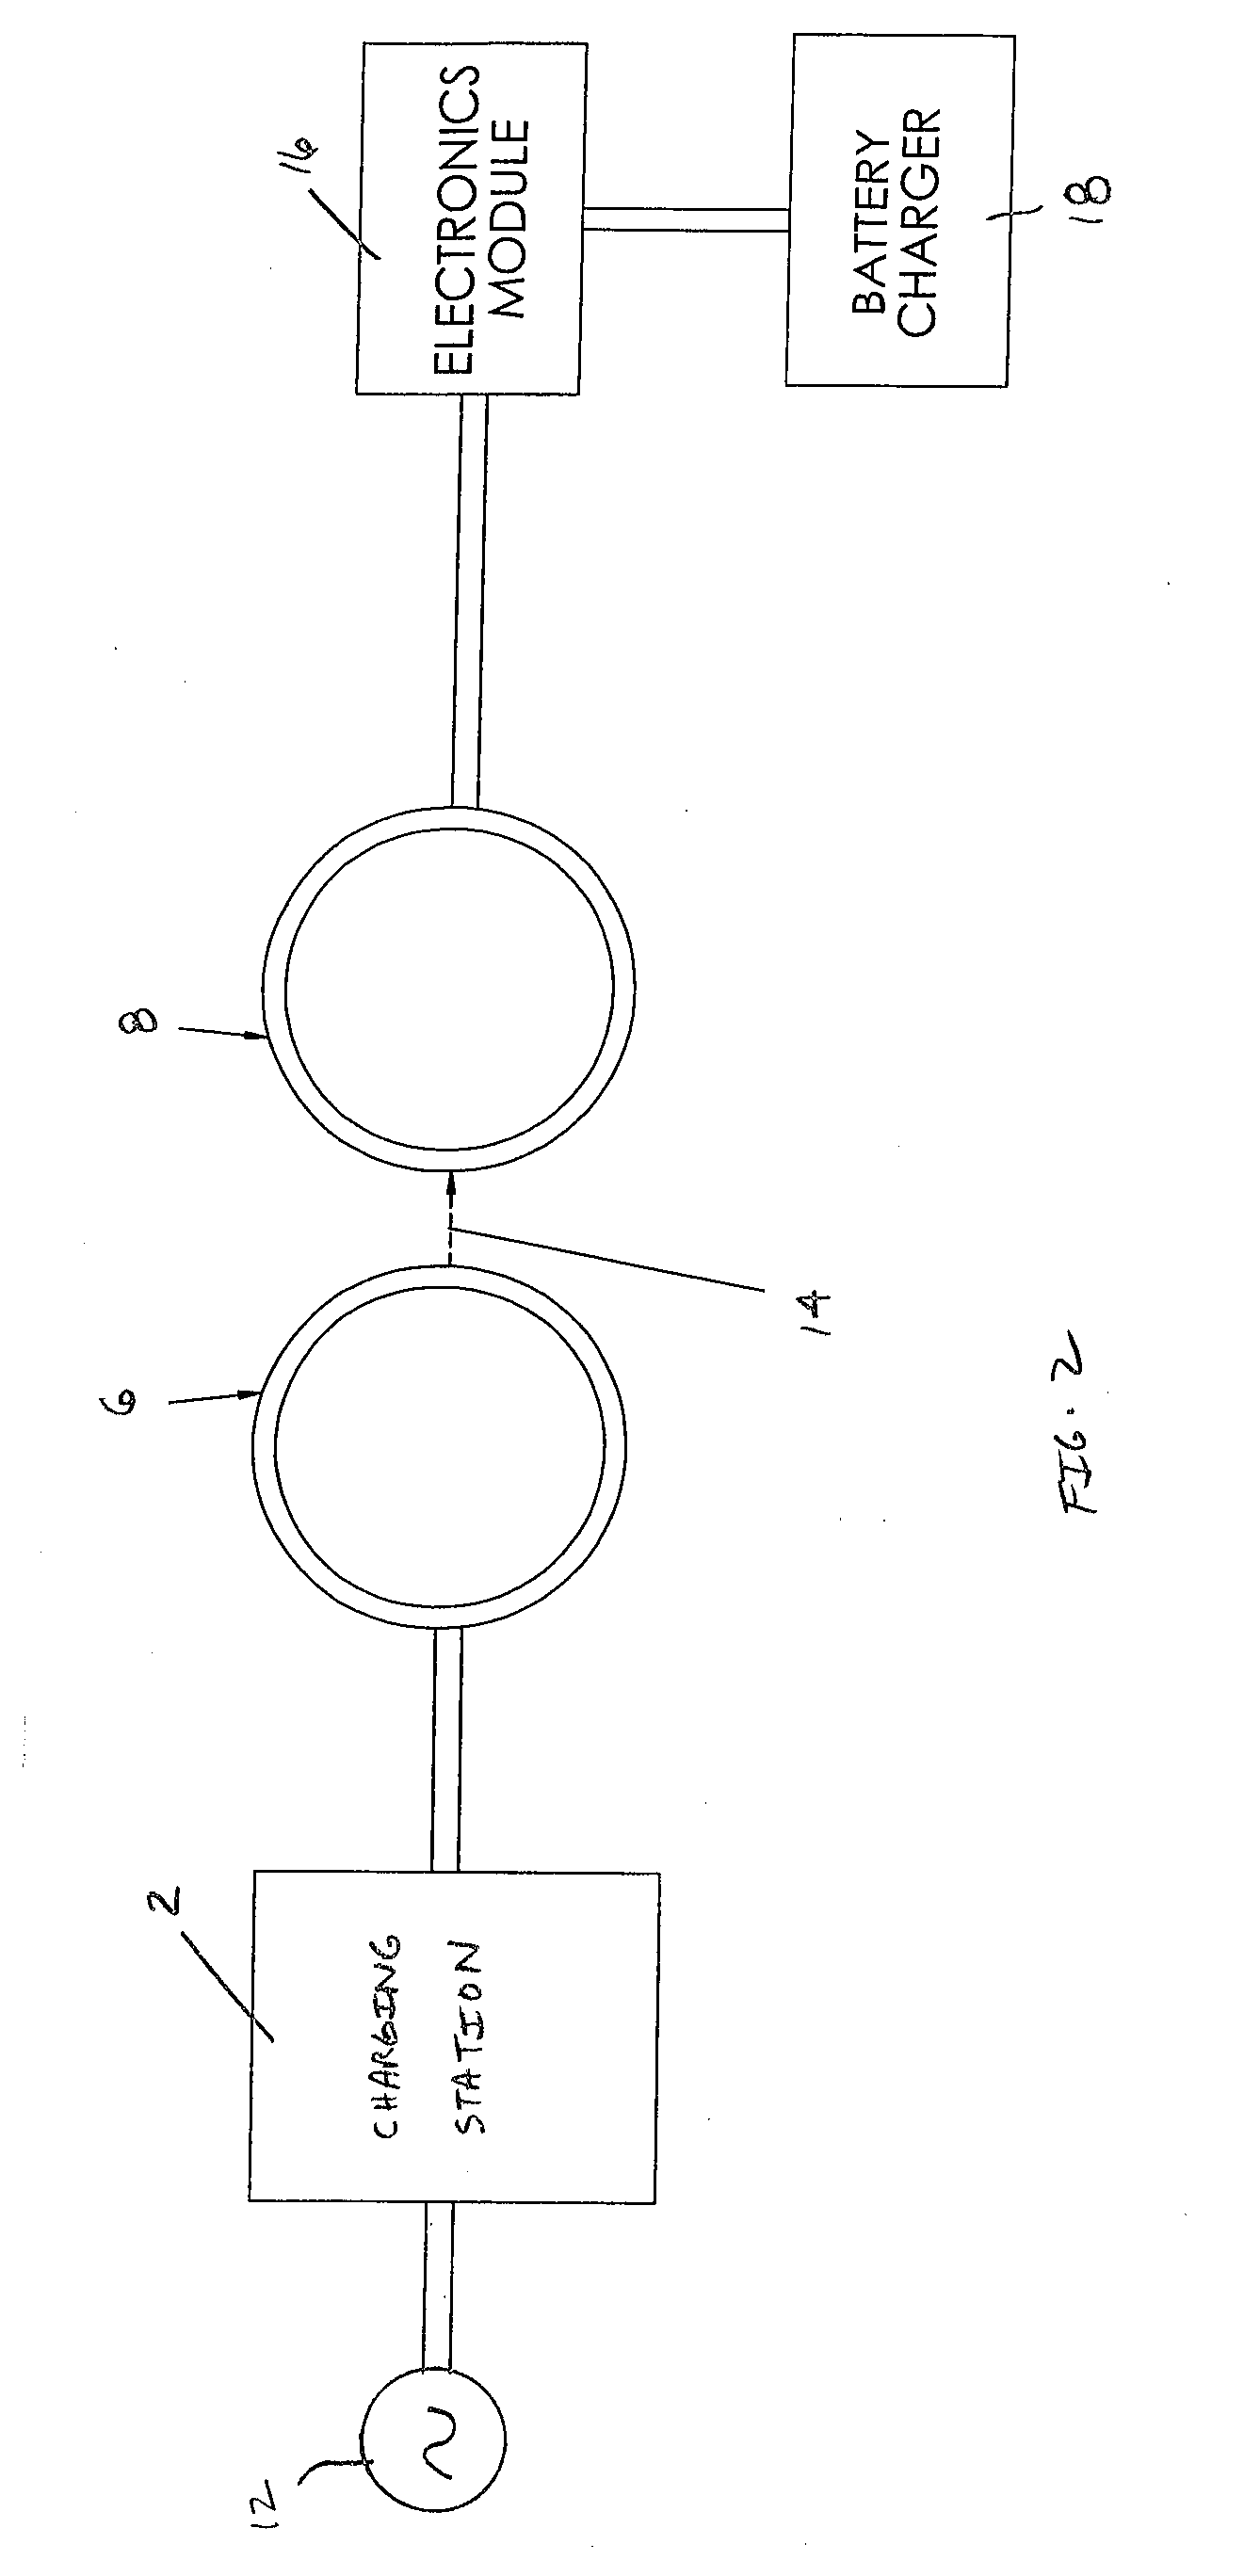 Secondary coil structure of inductive charging system for electric vehicles